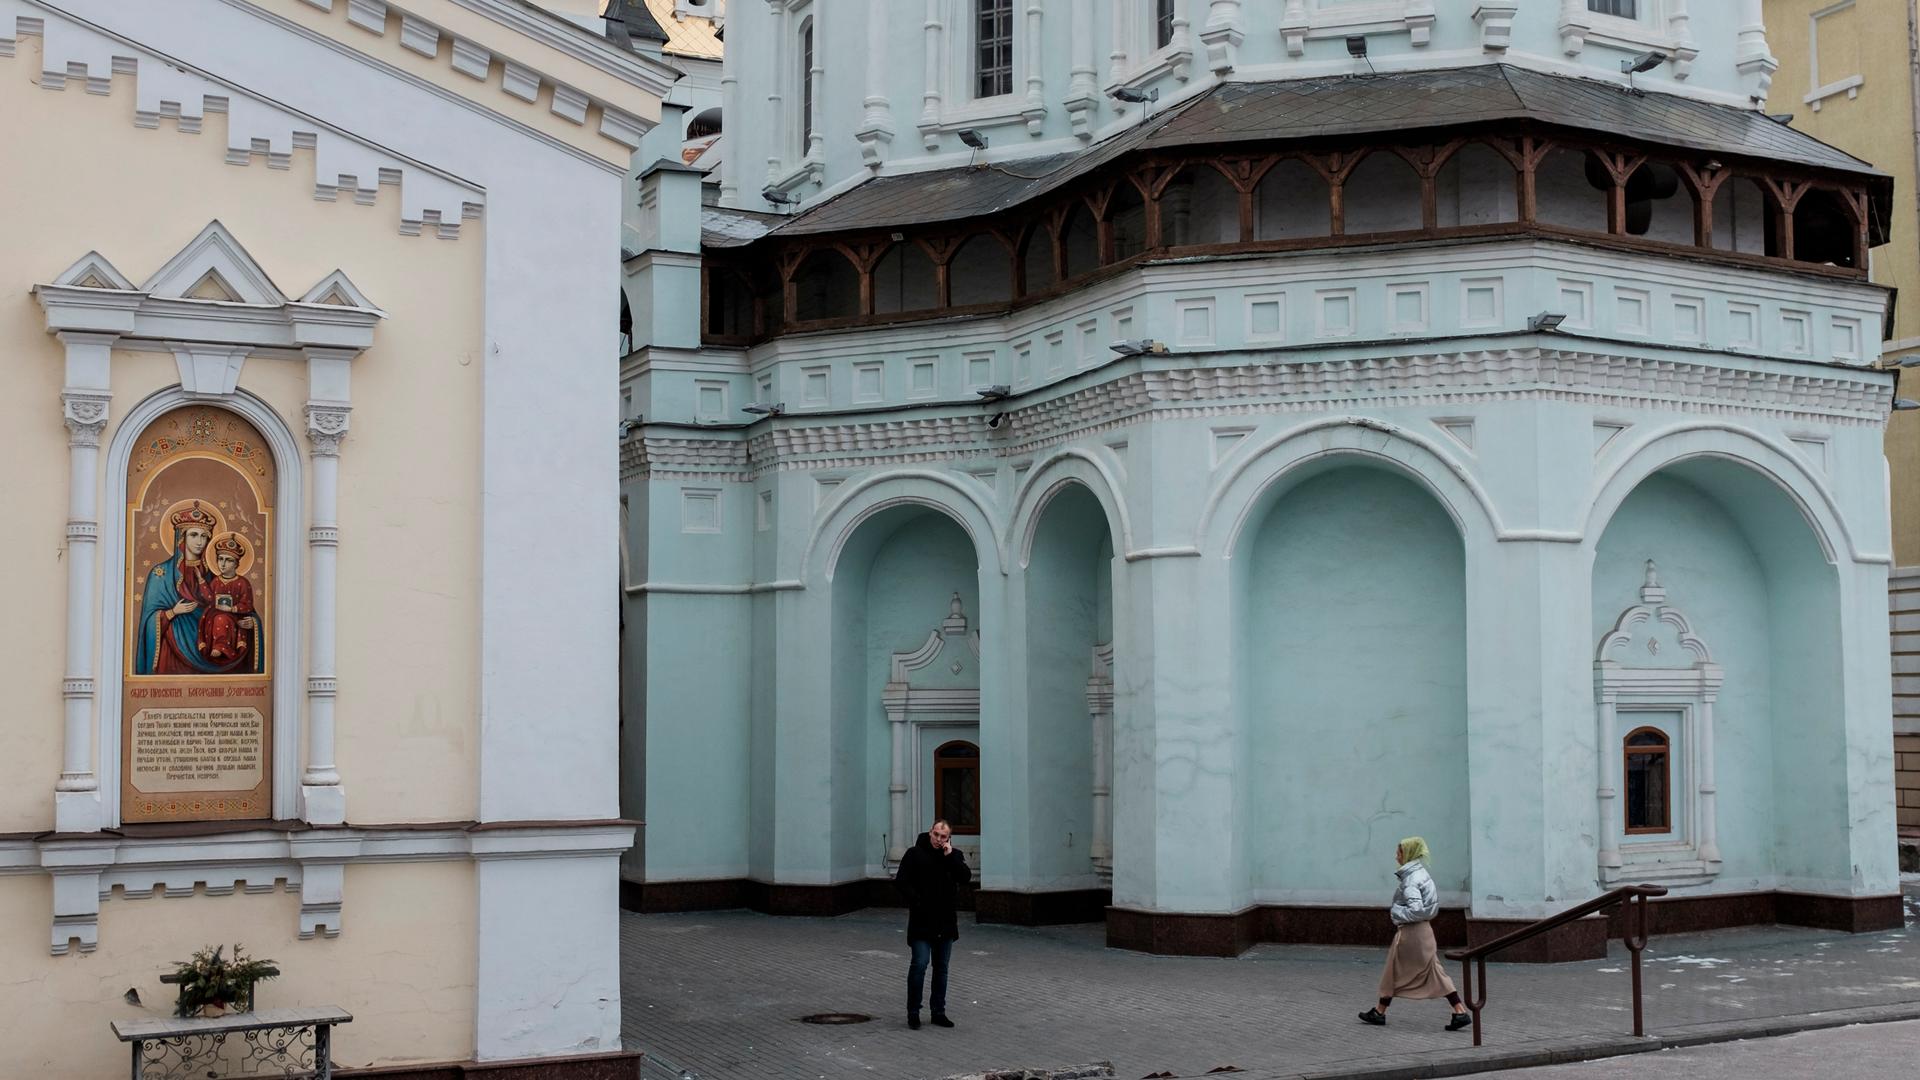 A Moscow-affiliated church with light blue painted walls.